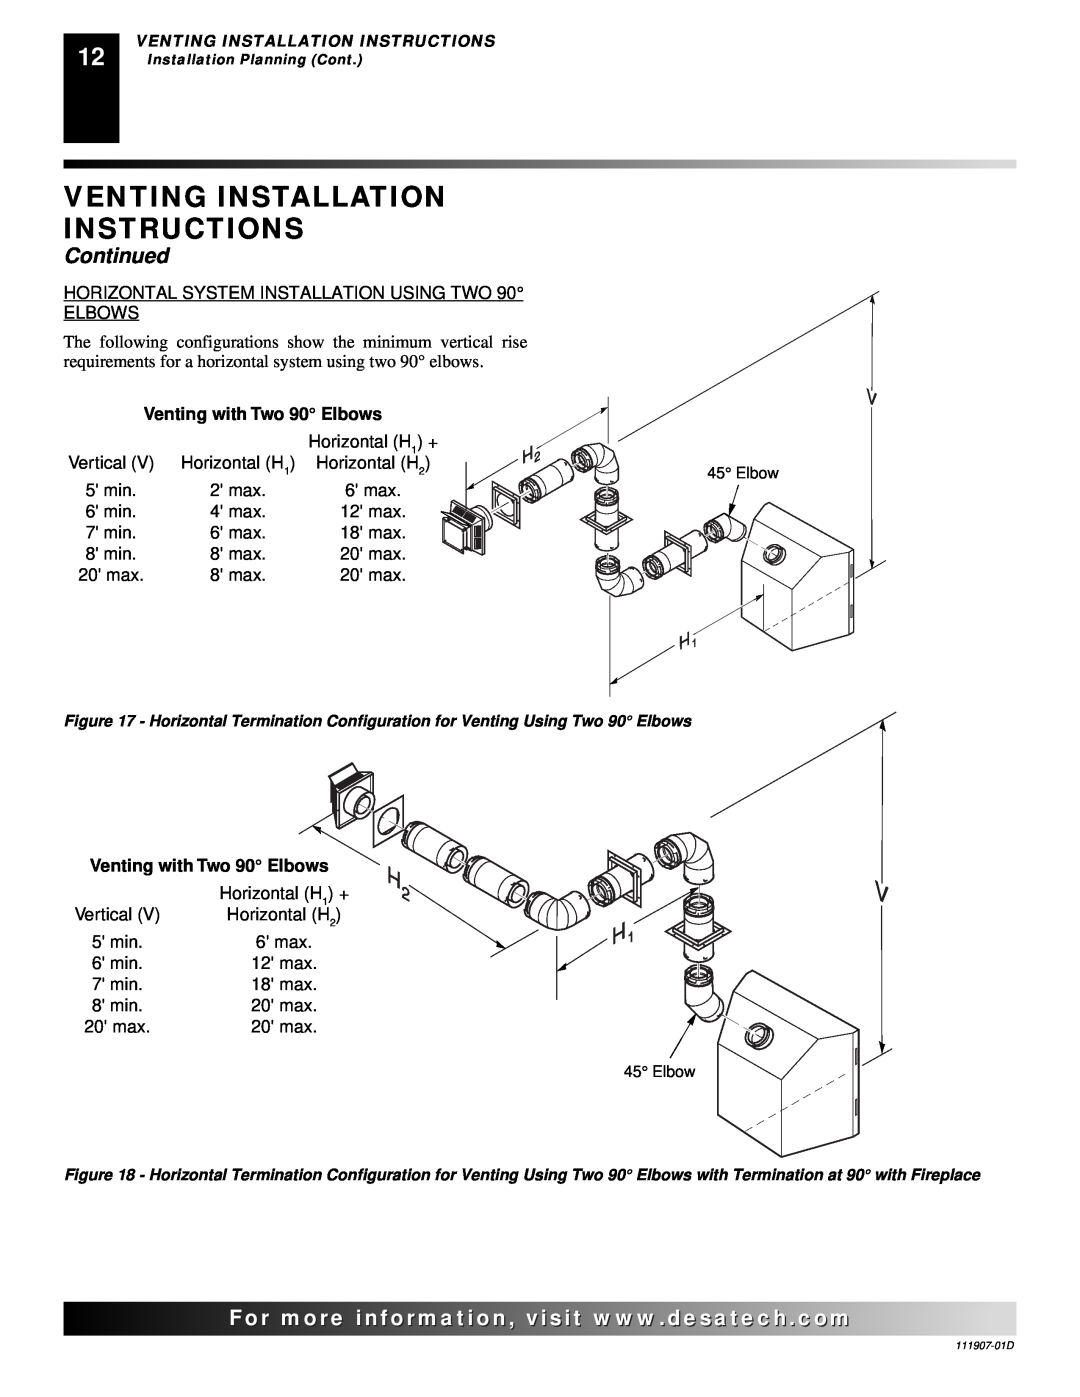 Desa VV42ENB(1), VV42EPB(1), V42EN-A Venting Installation Instructions, Continued, For..com, Venting with Two 90 Elbows 